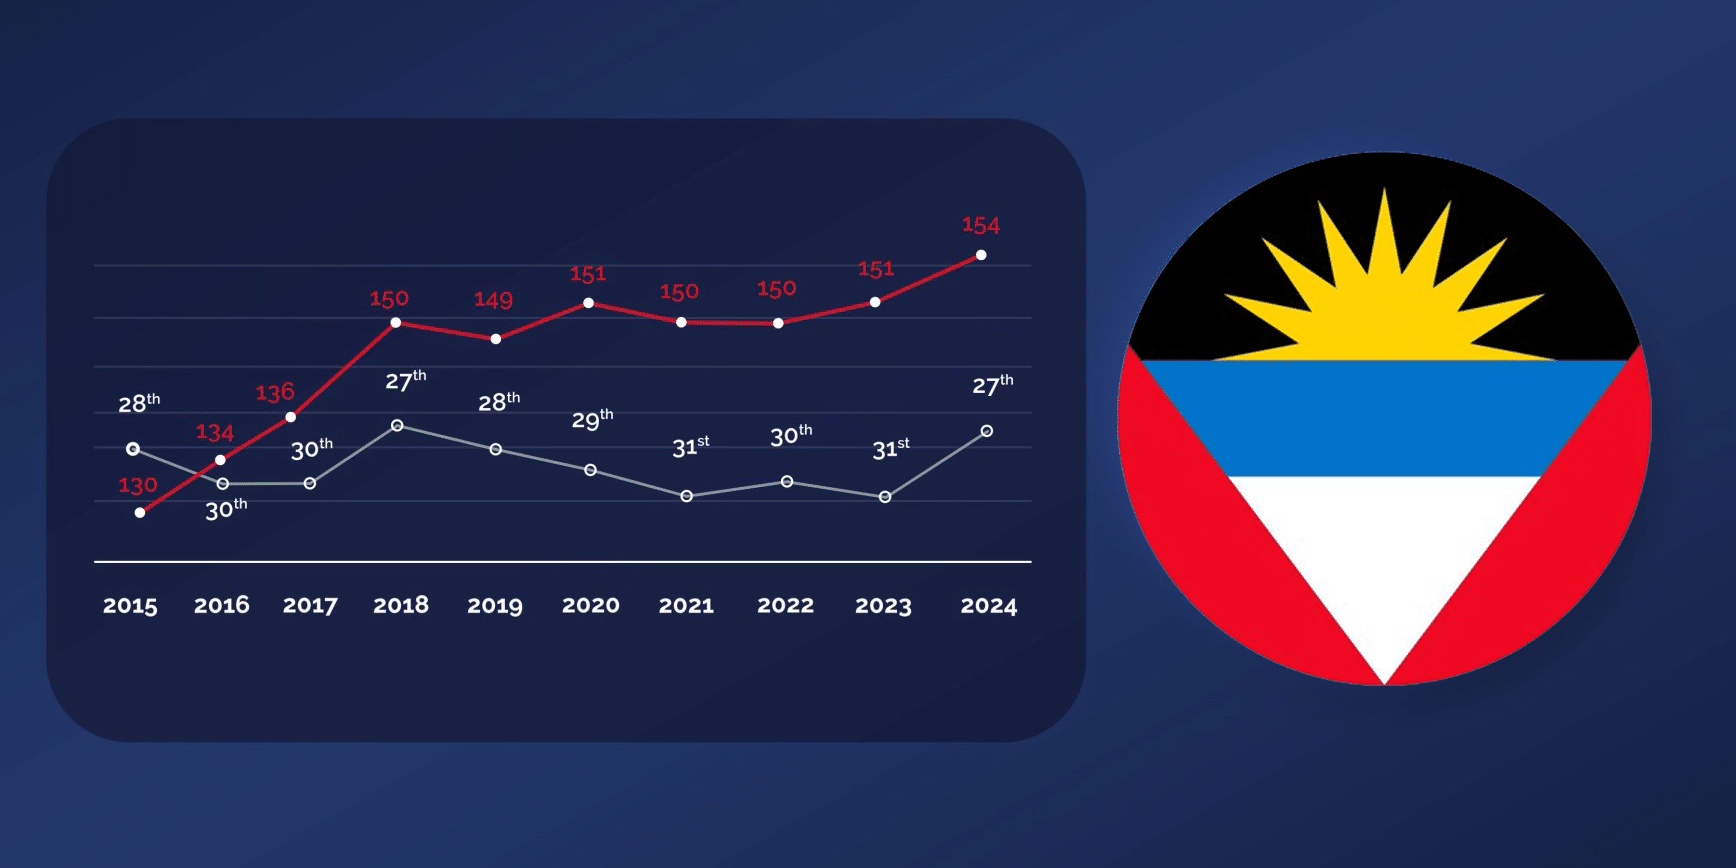 antigua and barbuda 1 frame at 0m15s - Evolution of Caribbean Citizenship Programs Over the Past 10 Years